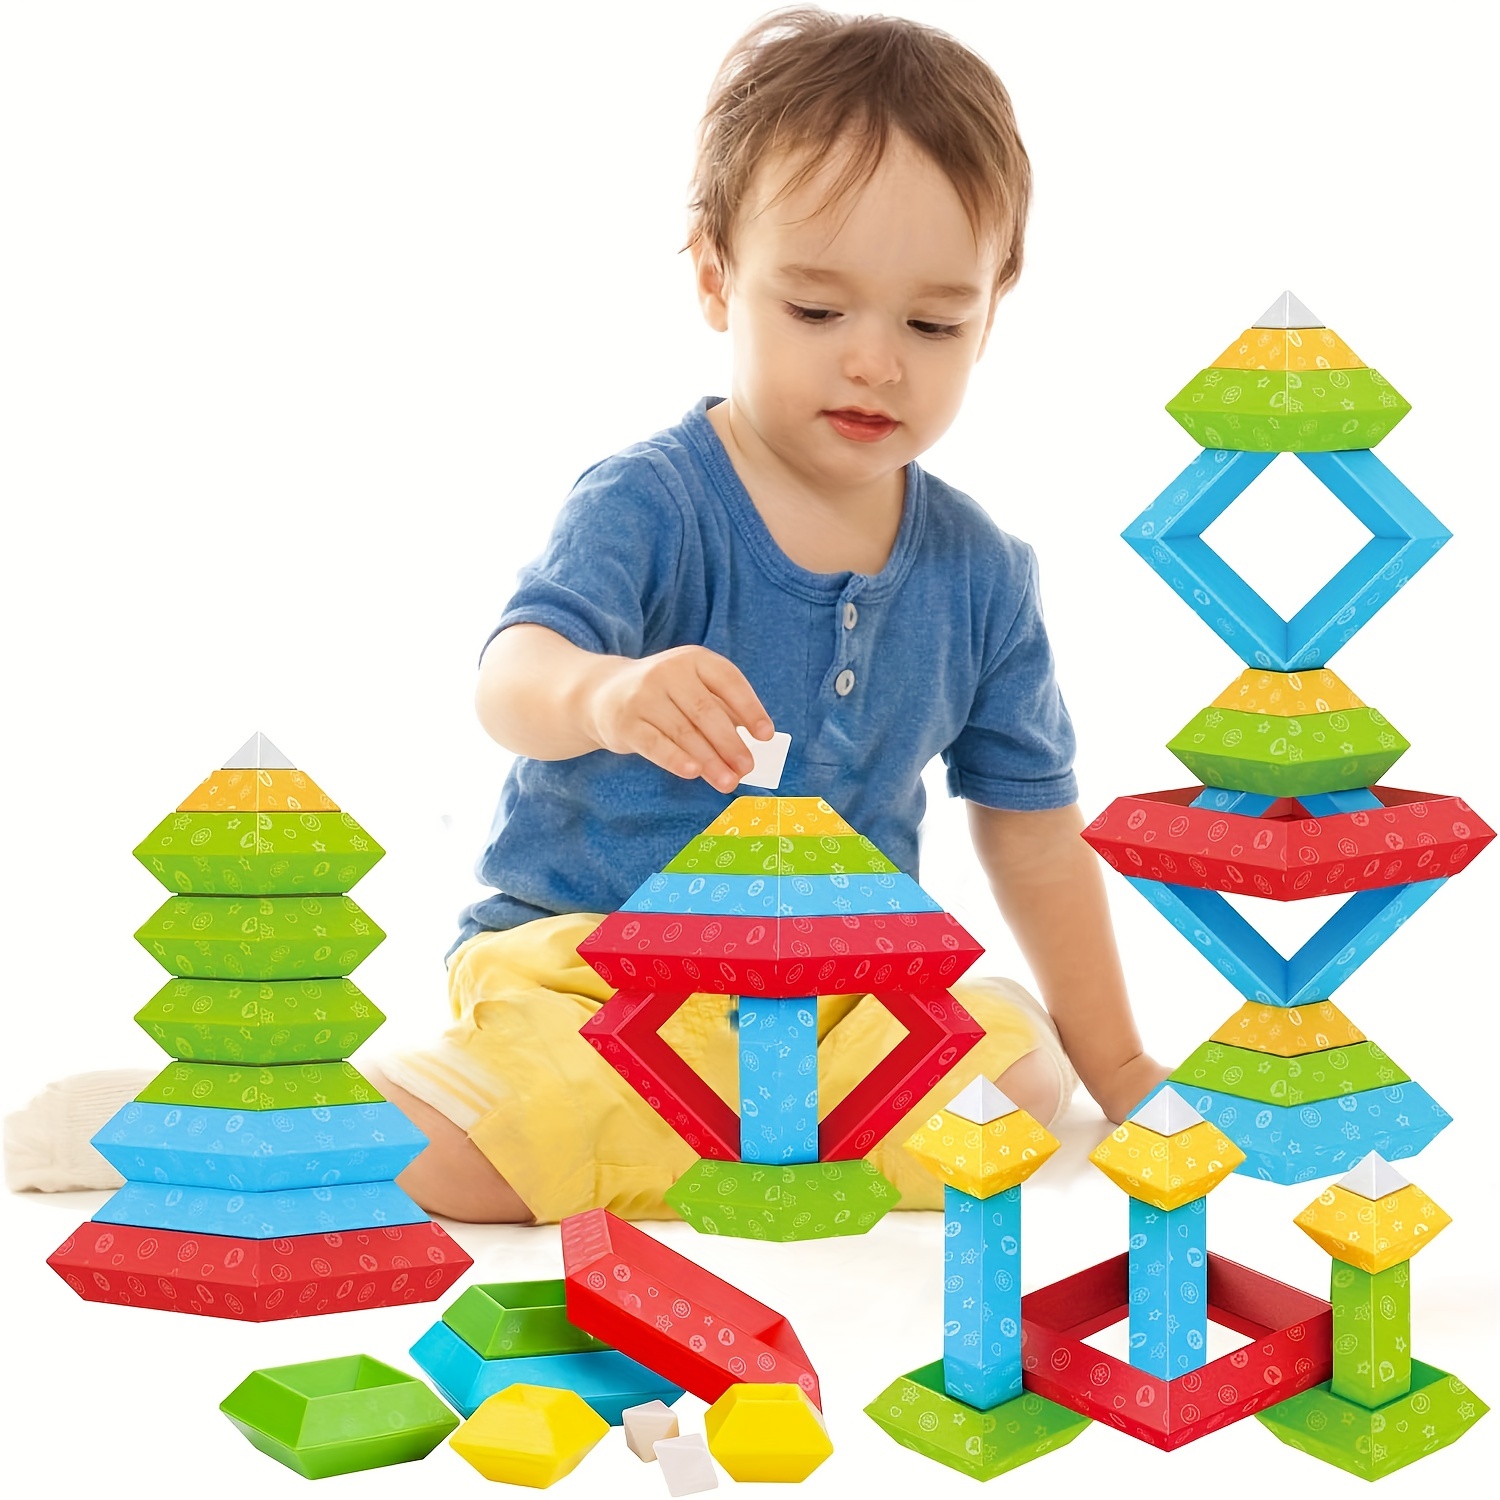 Stacking Cups Baby Toys 12-18 Months, Stacking Learning Toddler Toys Age 1-2 Numbers Shapes Patterns Montessori Toys for 1 Year Old Boy Girl